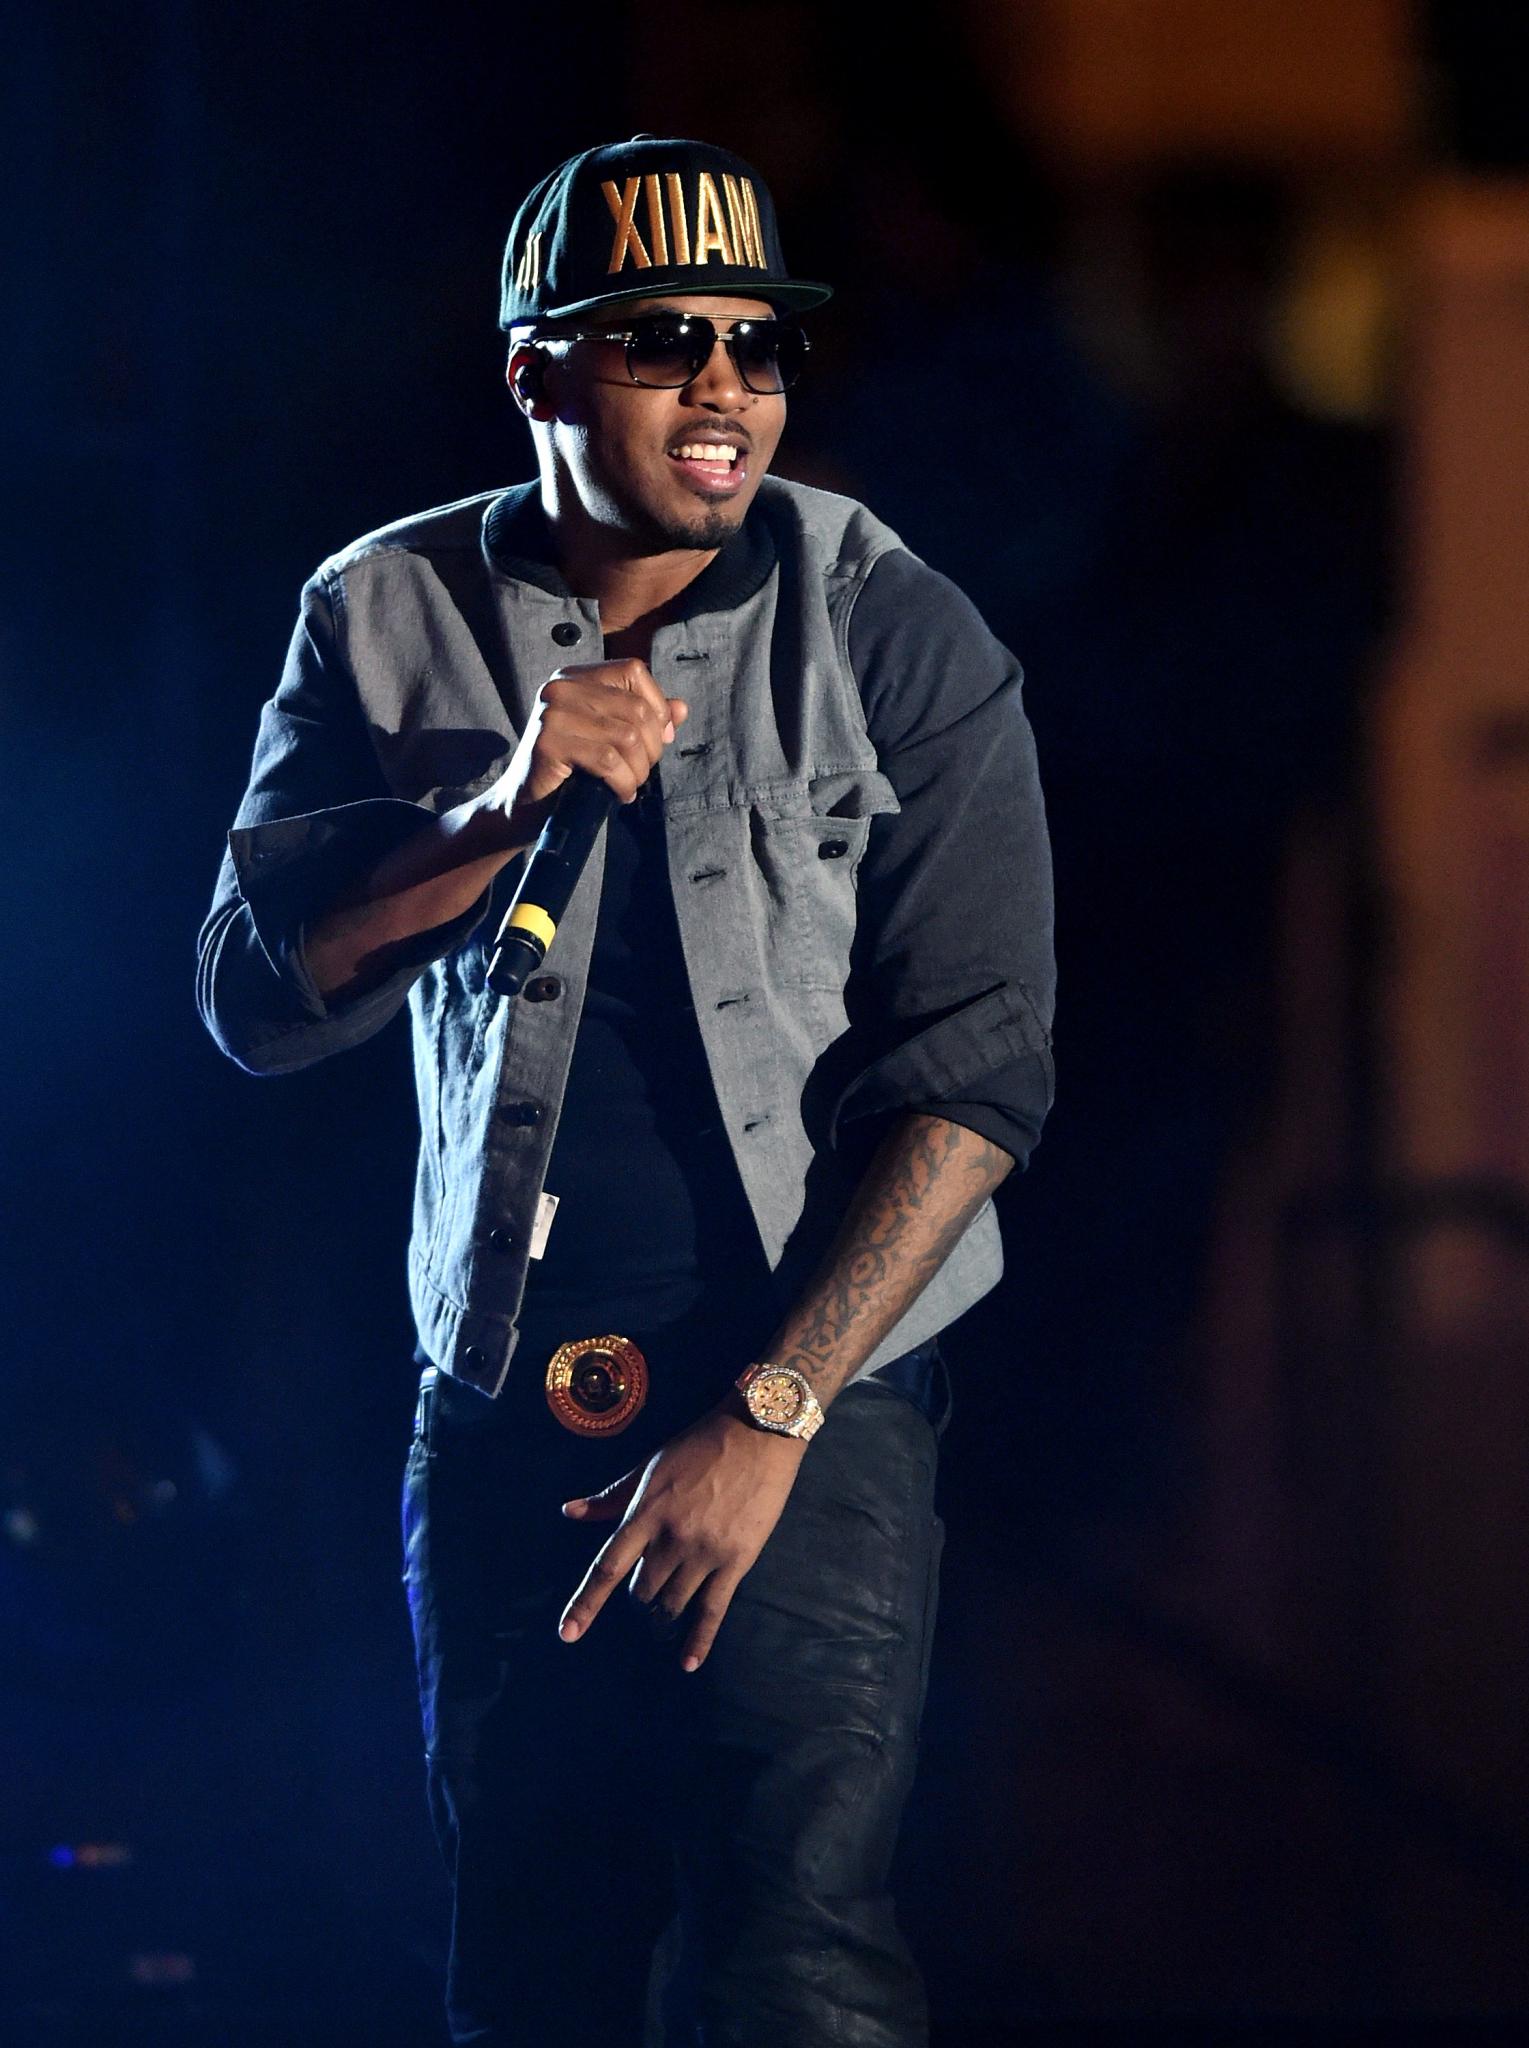 #MCM: Nas is Illmatic...